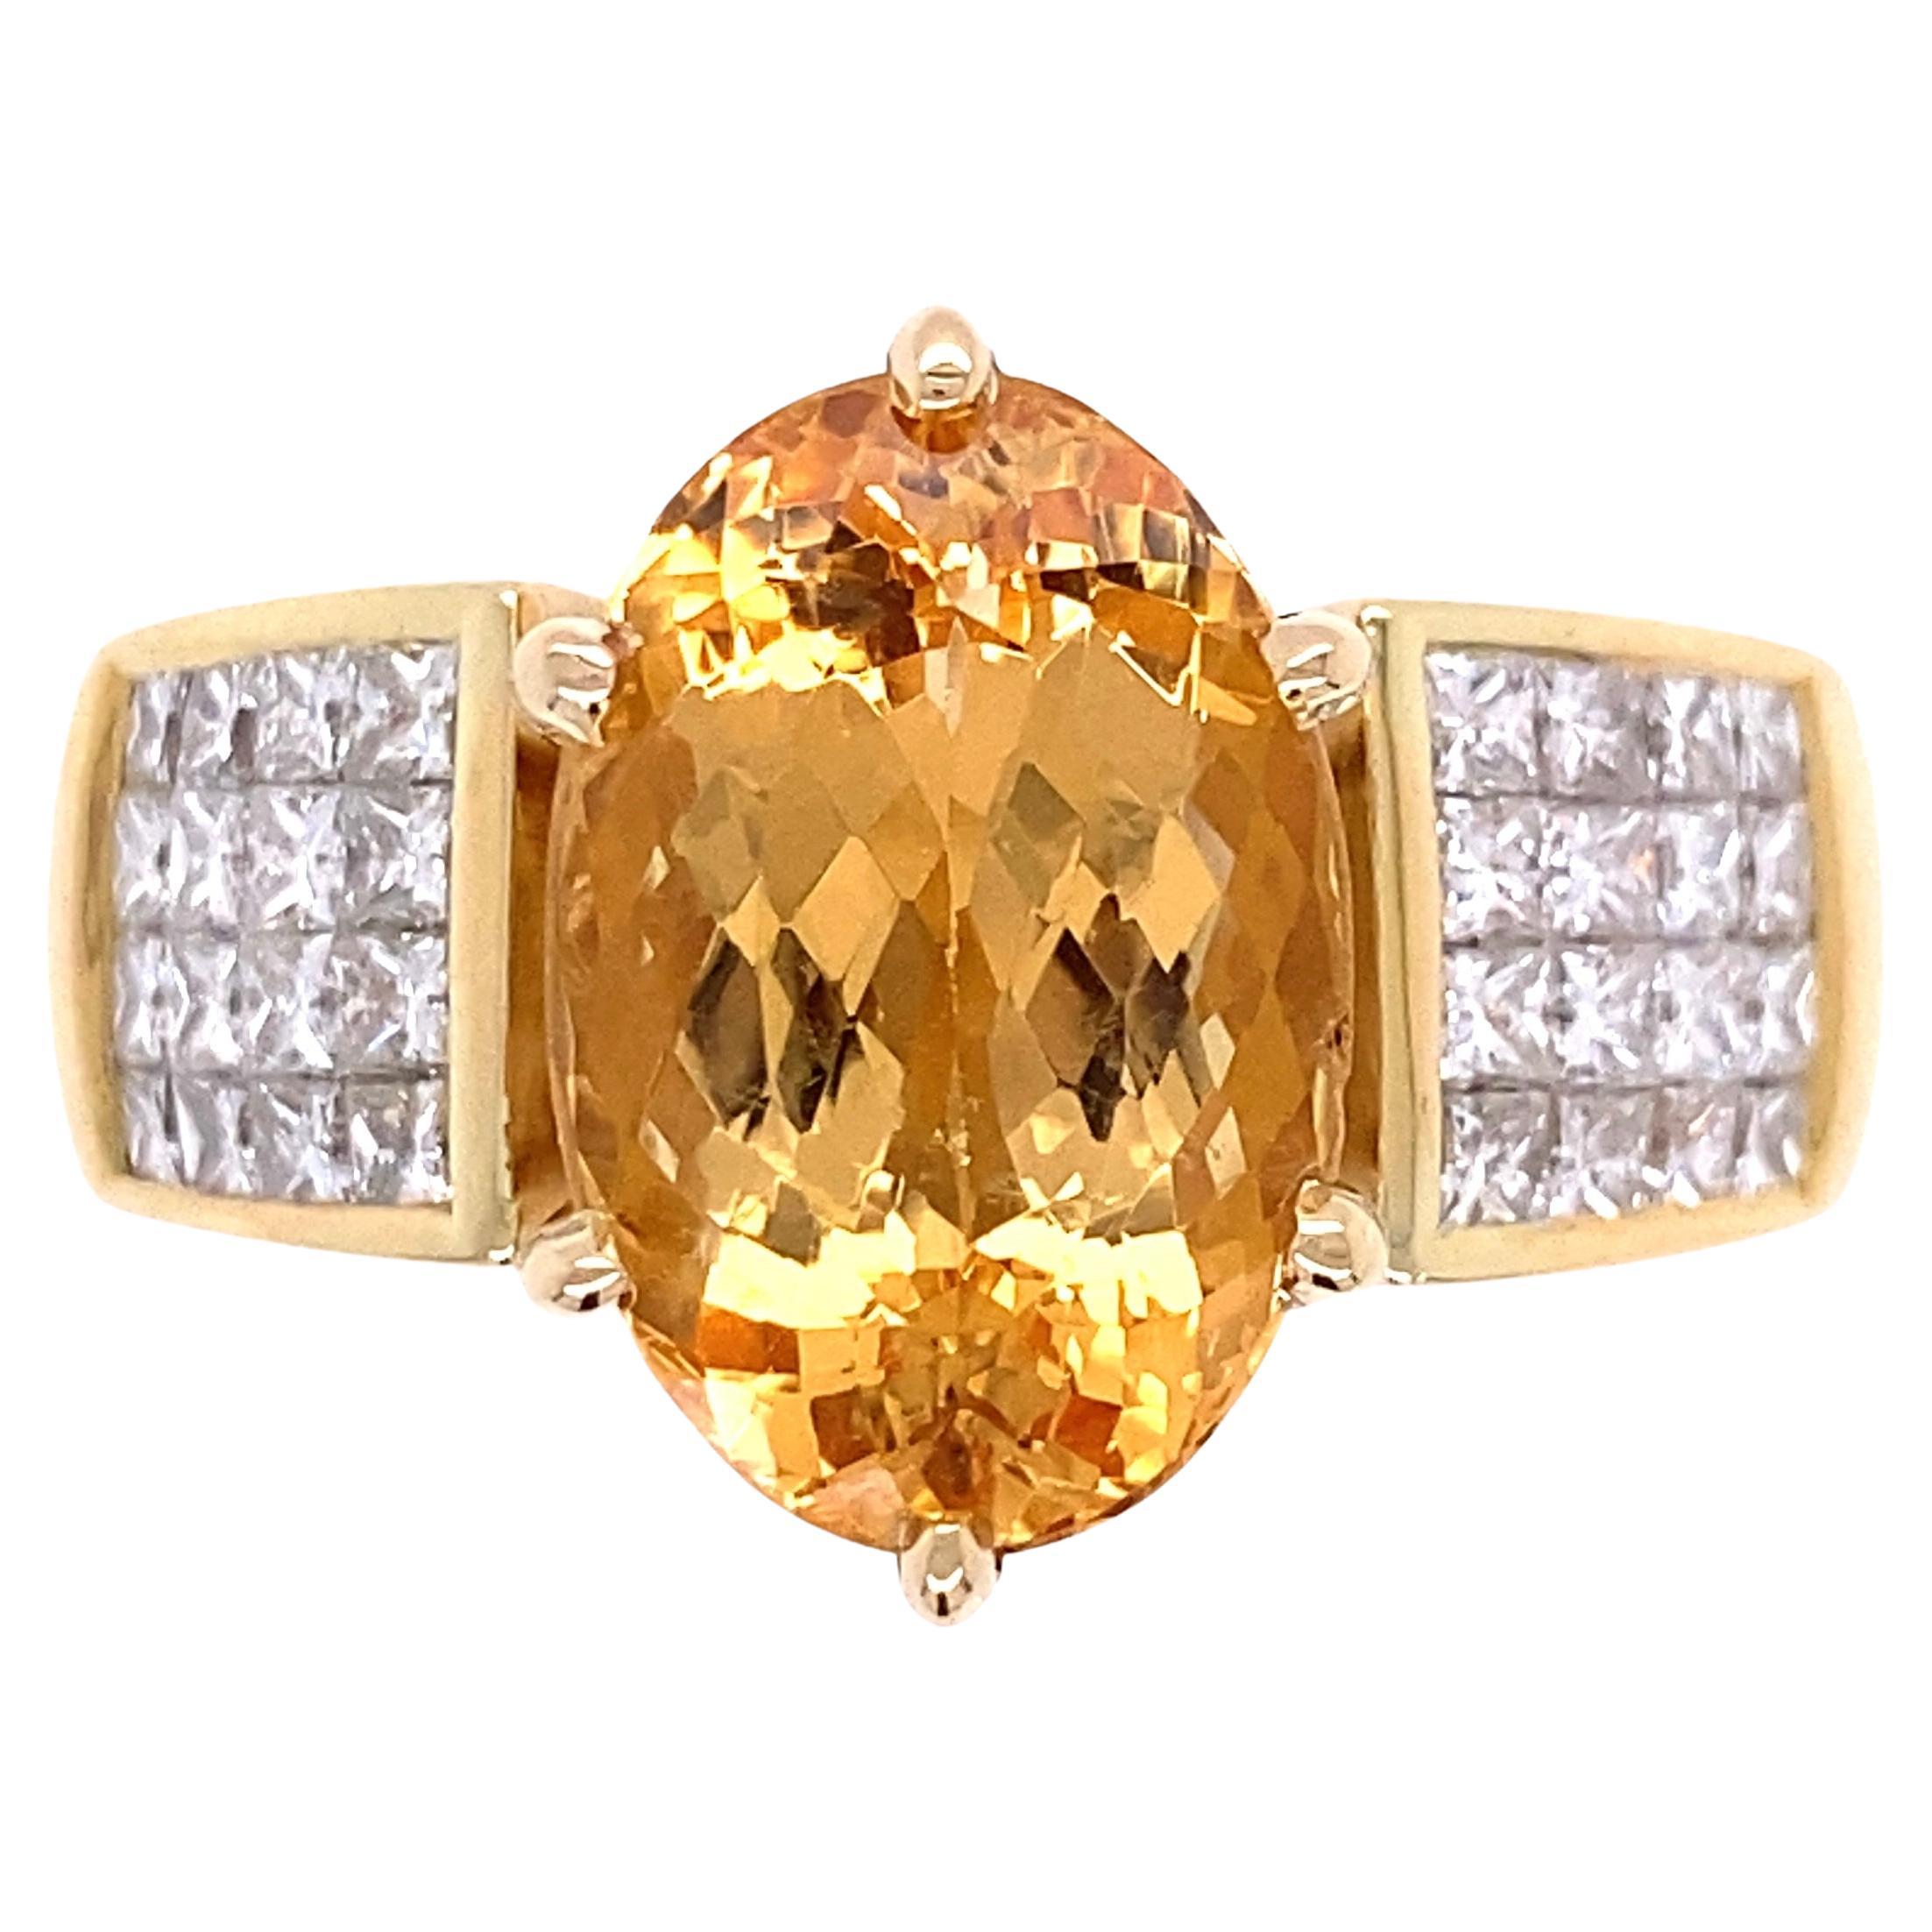 7.52 Carat Imperial Topaz and Diamond Gold Cocktail Ring Estate Fine Jewelry For Sale